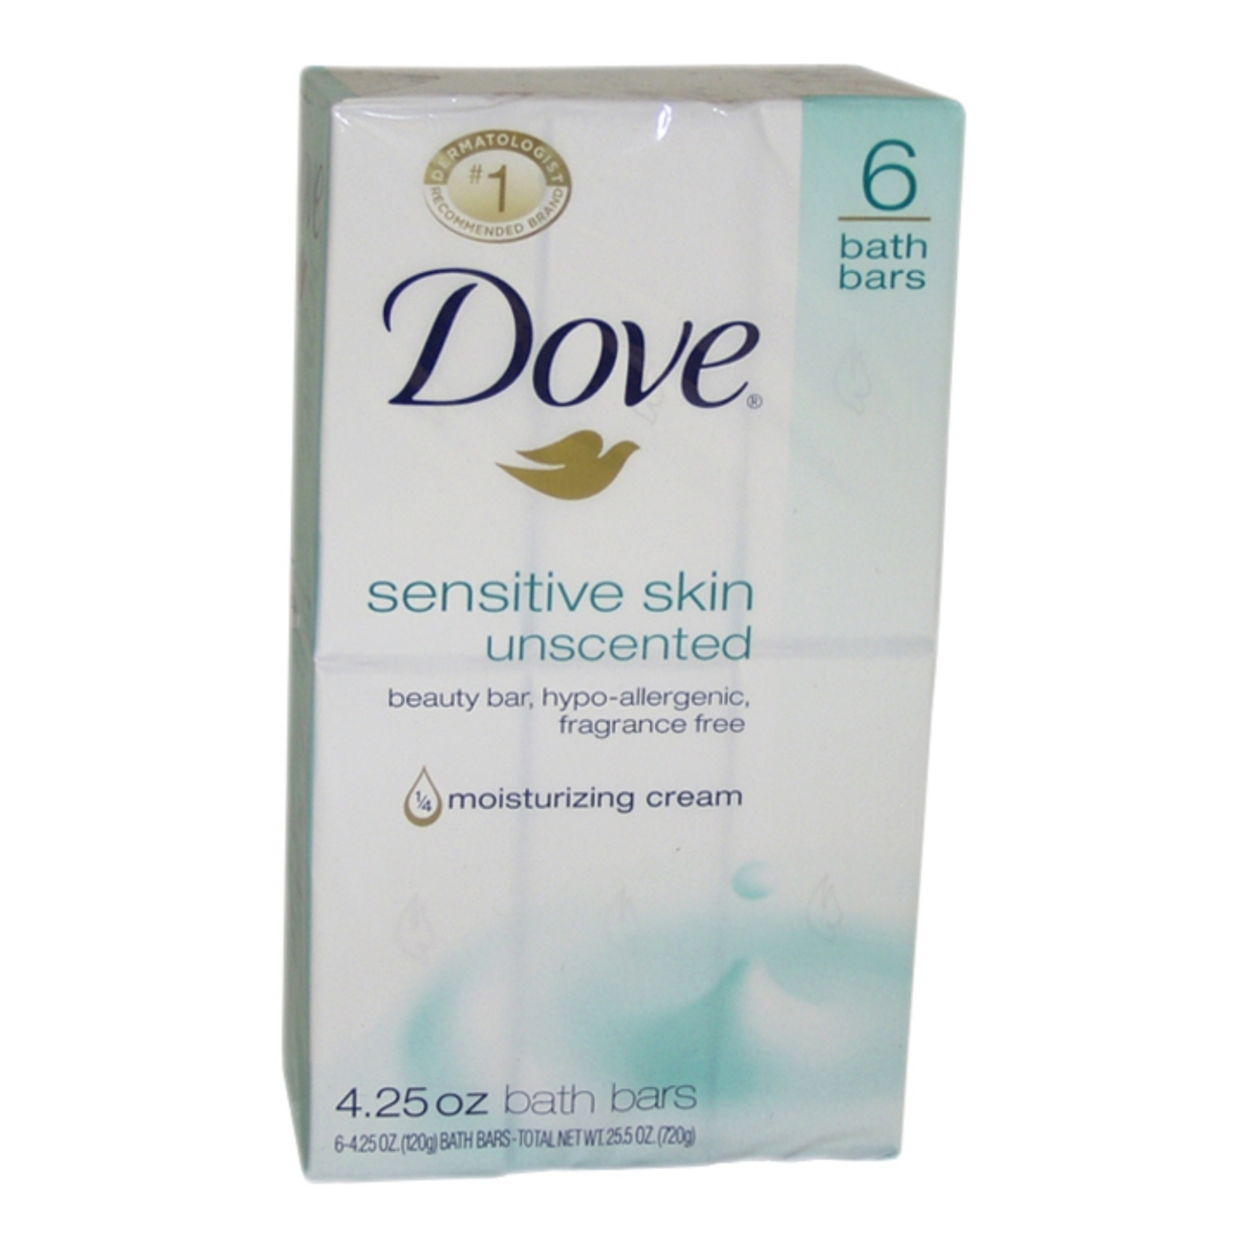 Dove Beauty Bar More Moisturizing Than Bar Soap Sensitive Skin With Gentle Cleanser for Softer Skin, Fragrance-Free, Hypoallergenic Beauty Bar 3.75 oz, 6 Bars - image 1 of 14